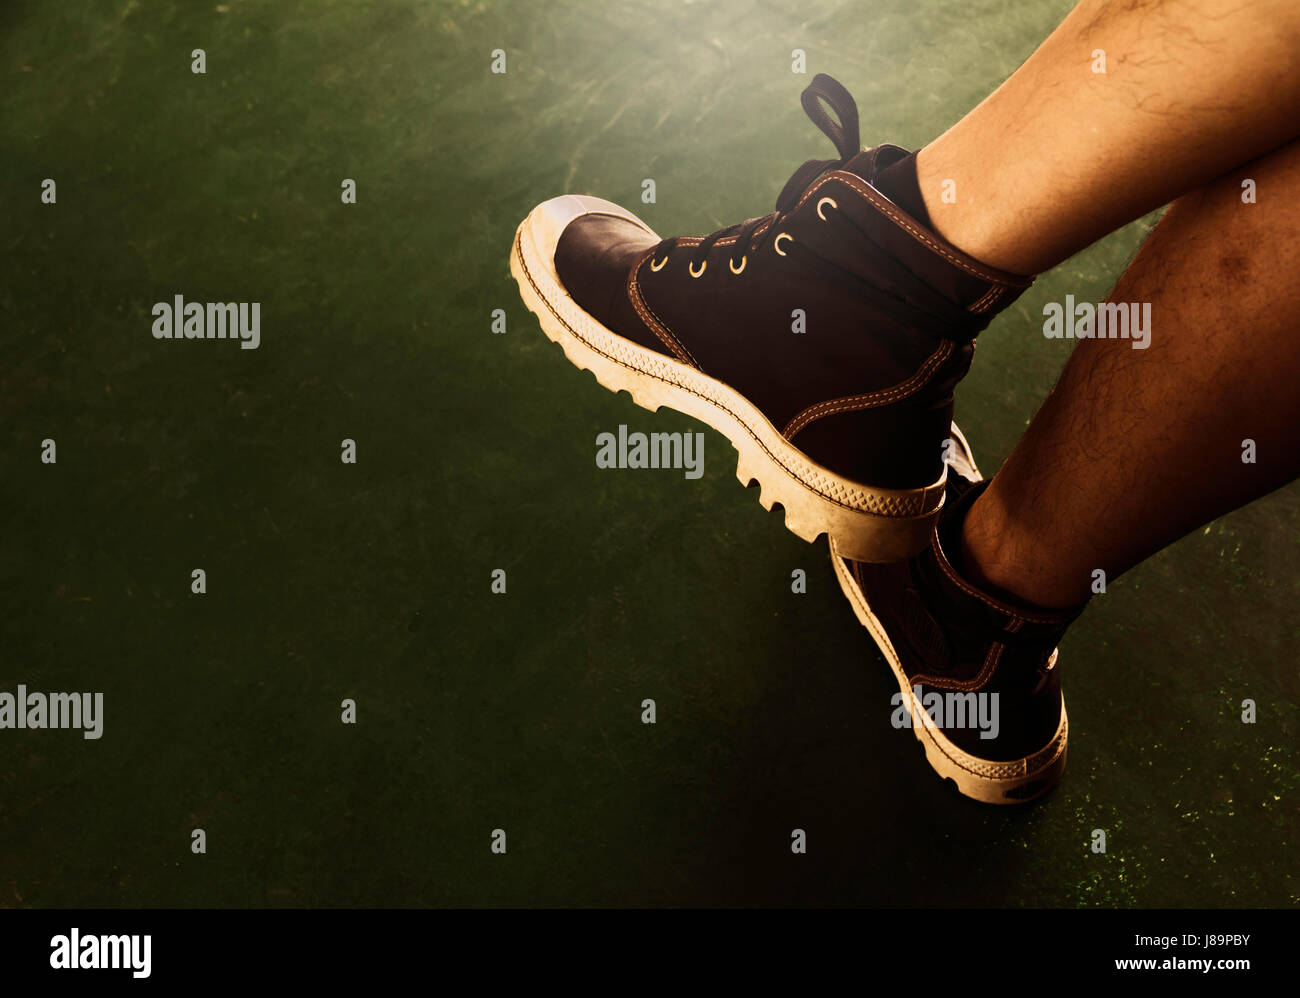 Close up of stylish female shoes. Outdoor fashion shoes footwear concept. Stock Photo